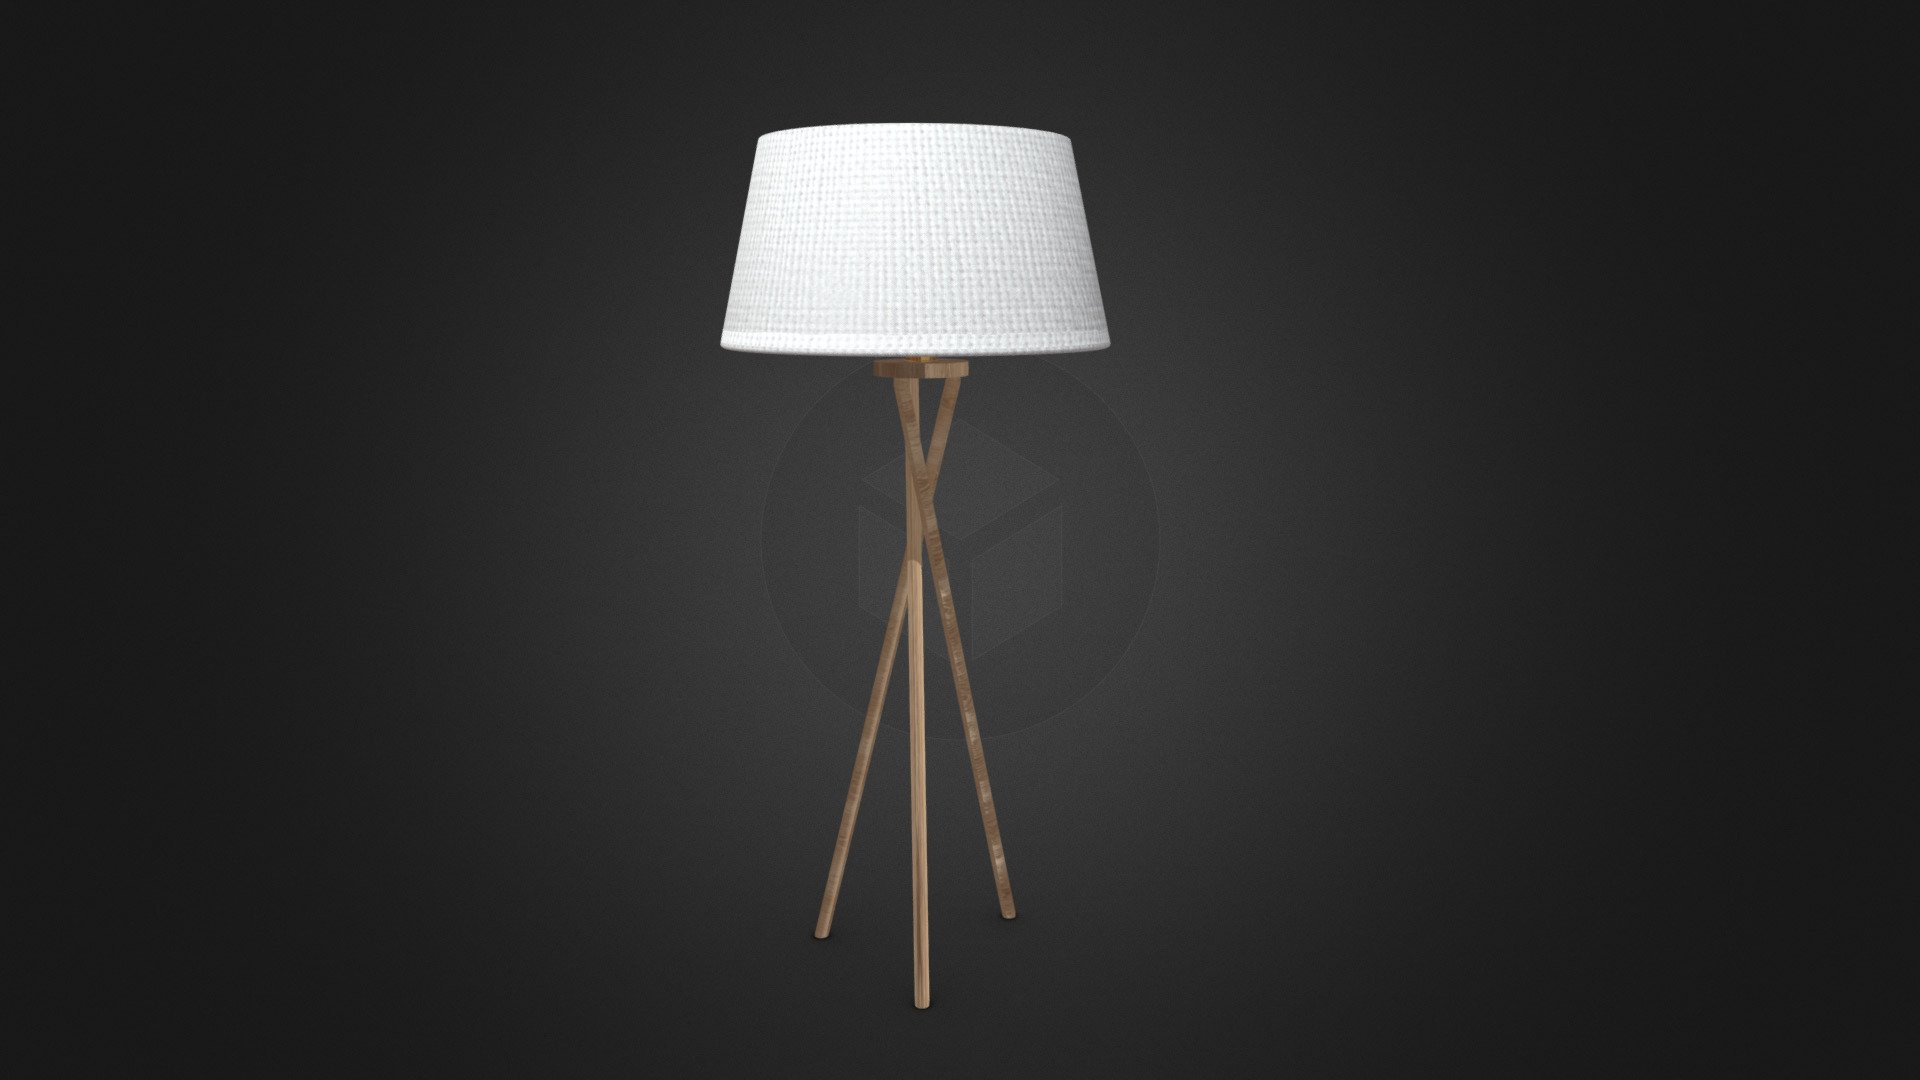 Three-legged floor lamp with white fabric shade

This three-legged floor lamp is an aesthetic highlight that will enchant your interior visualisation with its attractive wooden frame and plain white fabric shade. With the warm glowing light it spreads, you can enjoy every evening hour in your 3D model 3d model